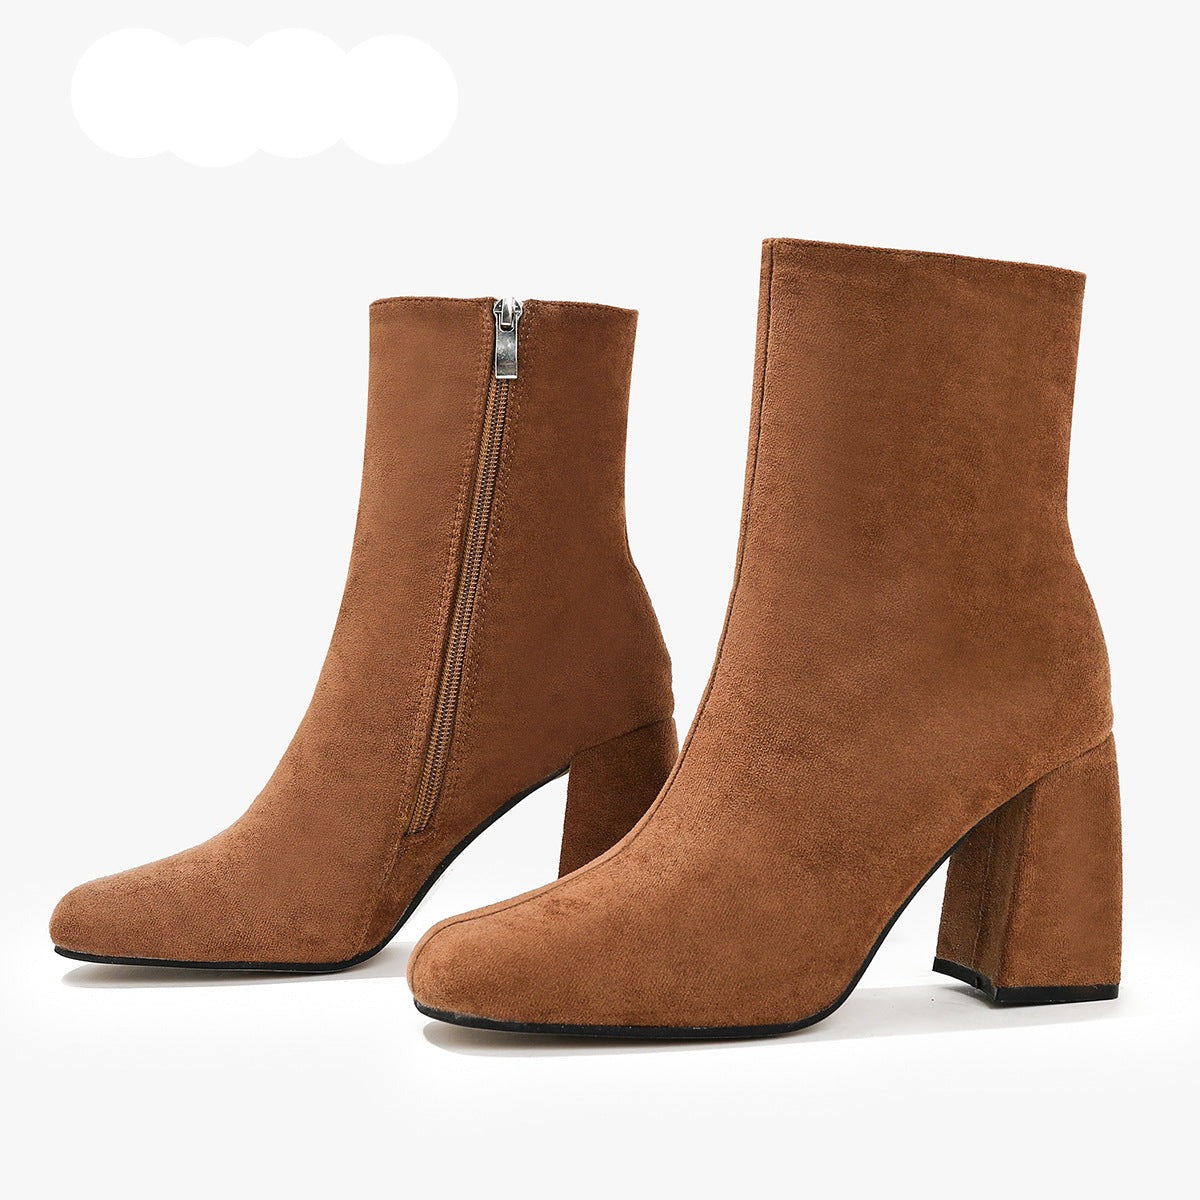 Nude Suede Boots Fashion Closet Clothing